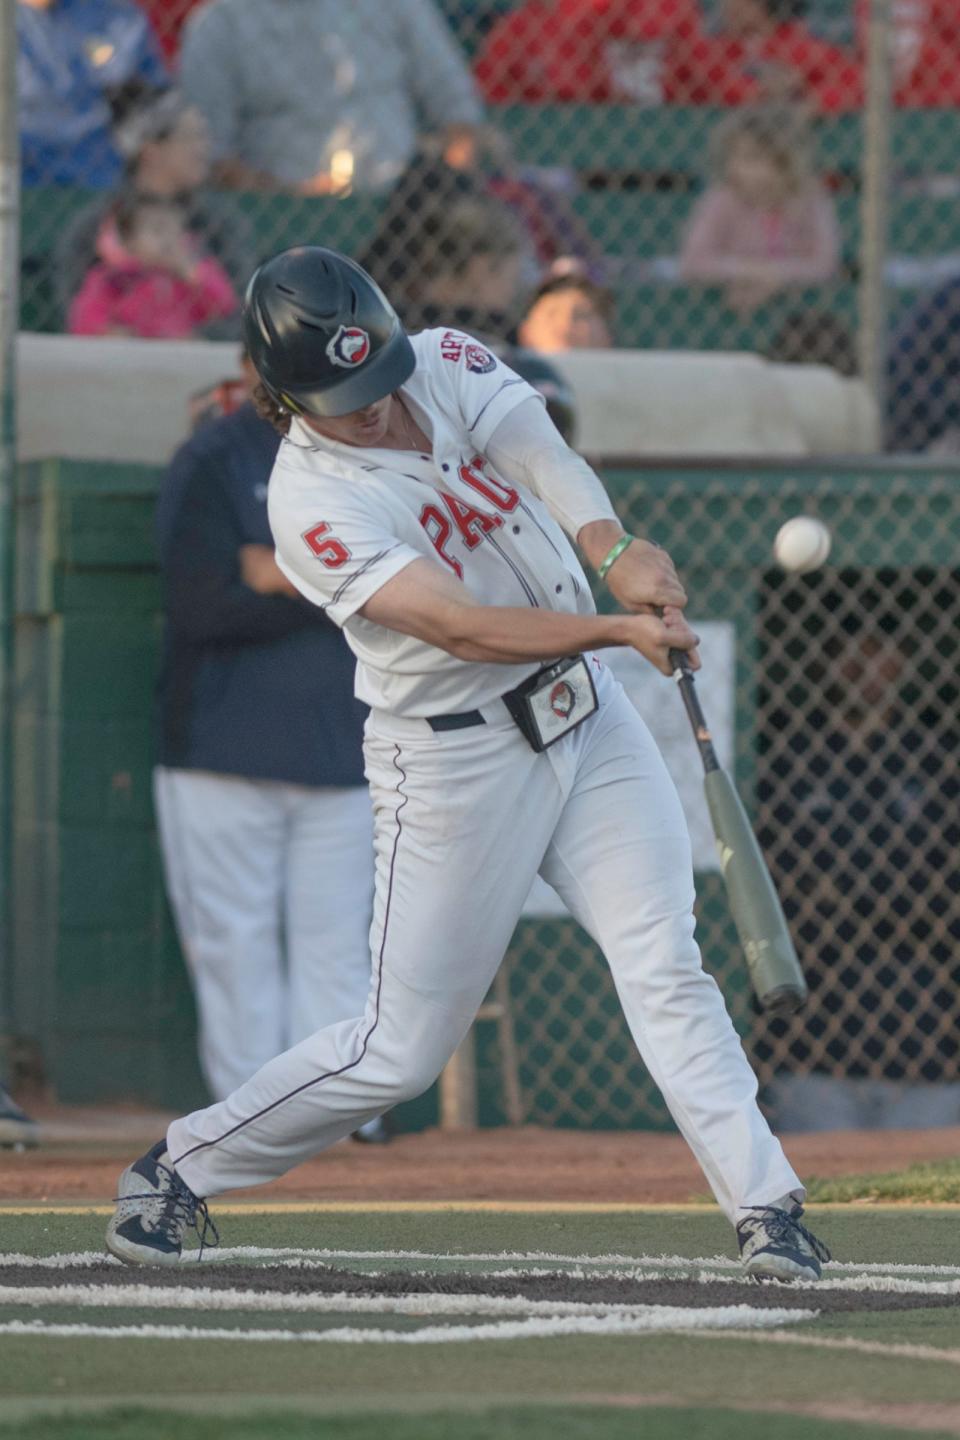 Colorado State University Pueblo's Noah Hennings gets a hit during the Pack the Park game at the Runyon Sports Complex on Friday, April 29, 2022.